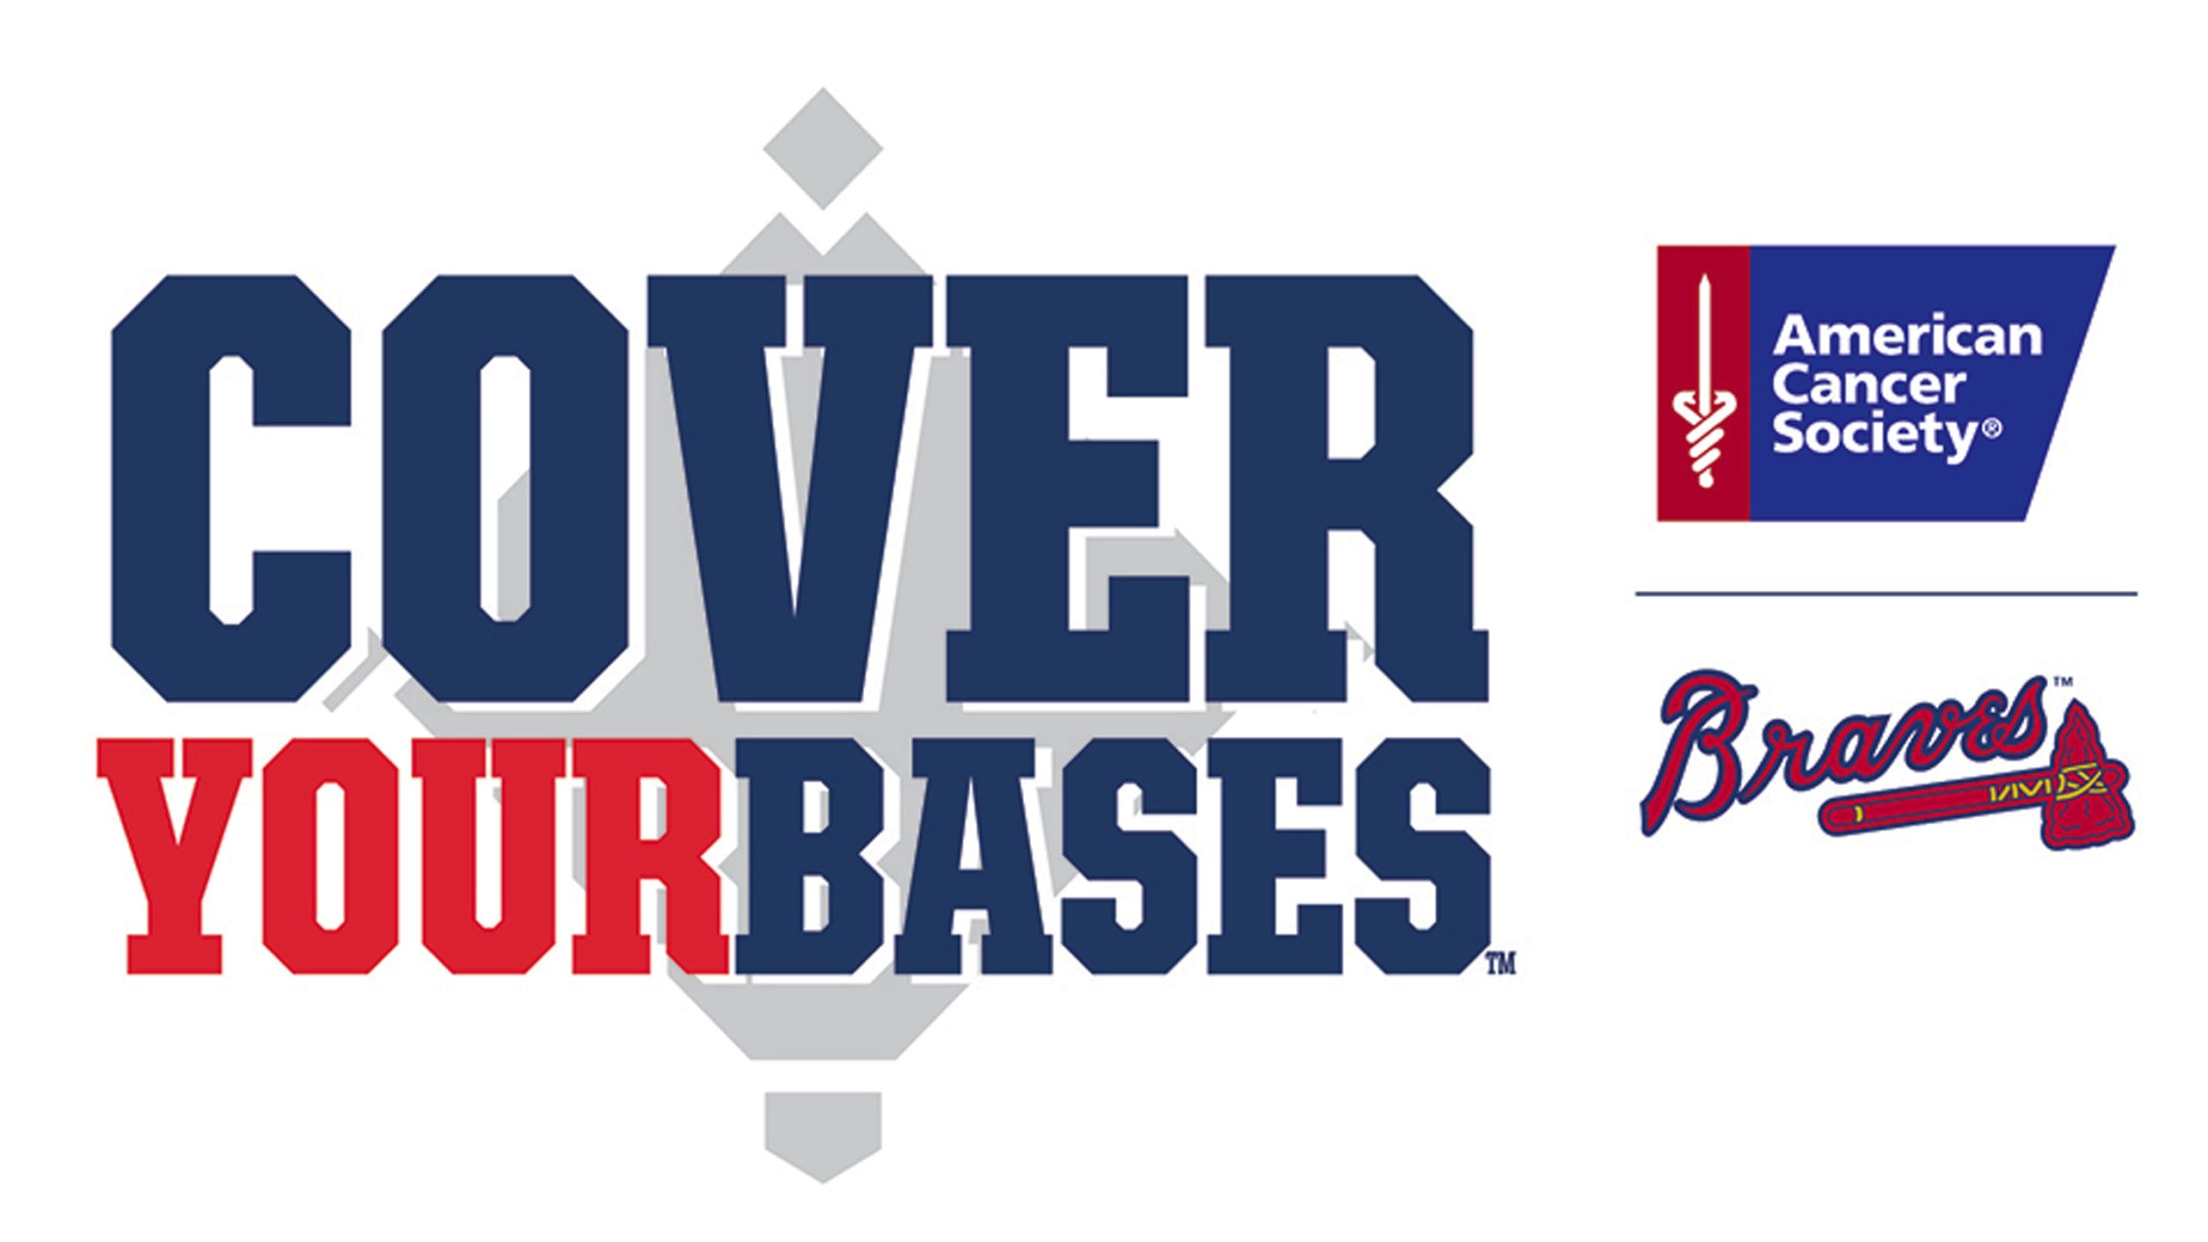 Braves, Cover Your Bases